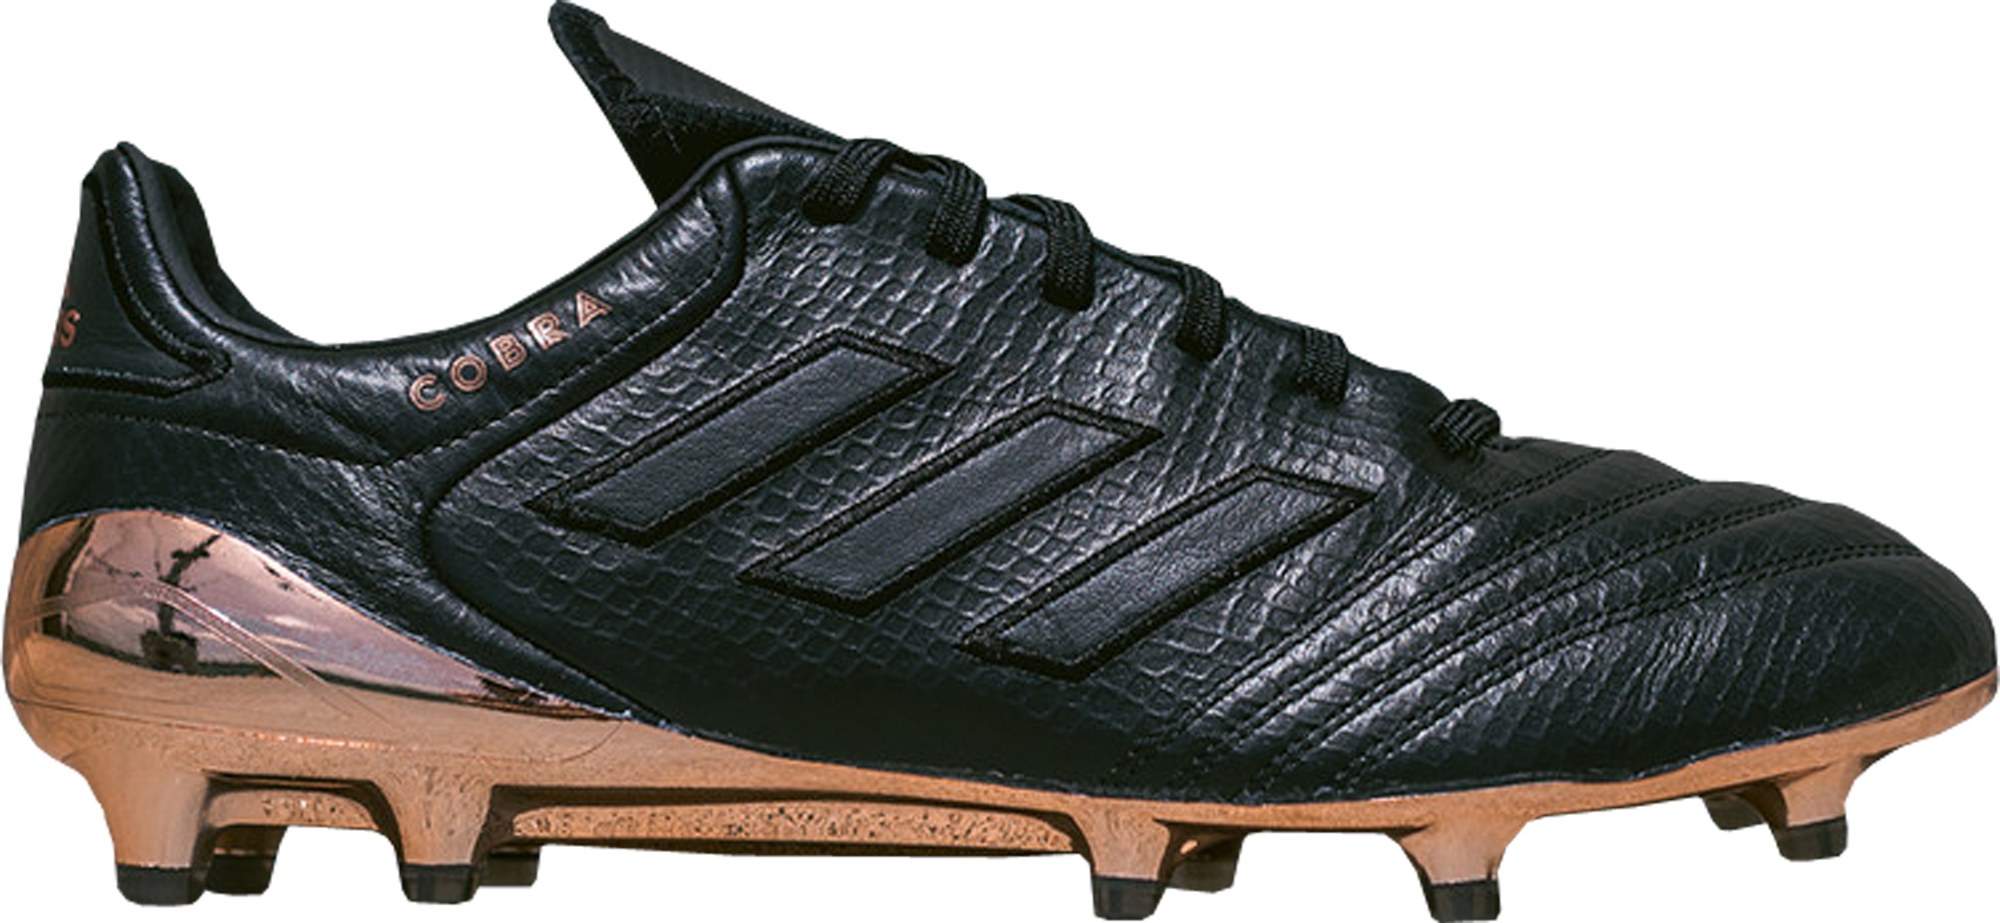 mundial cleats